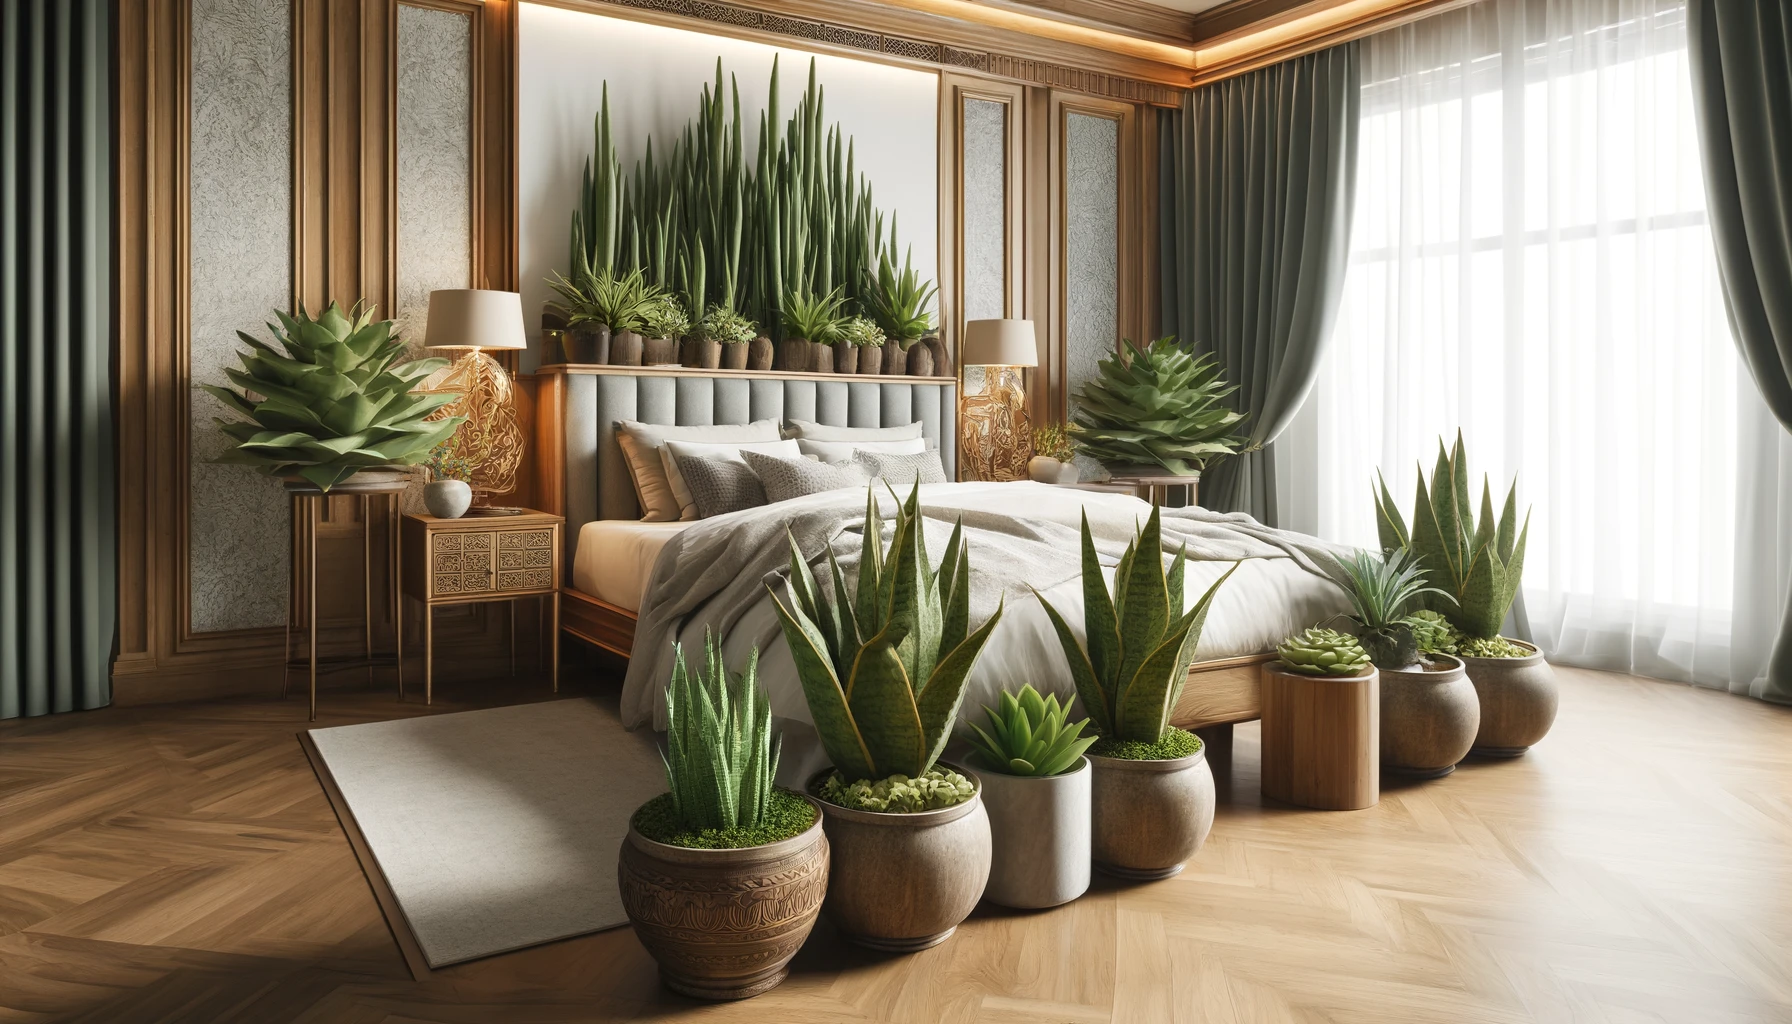 Hyper-realistic image of succulent snake plants in ornate wooden and stone pots within a luxurious bedroom. The scene features a plush bed with high-quality linens, elegant bedside tables, and soft ambient lighting that enhances the rich textures and colors of the plants. This tranquil and stylish environment highlights the snake plants as refreshing natural elements, contributing to the serene and sophisticated bedroom decor.